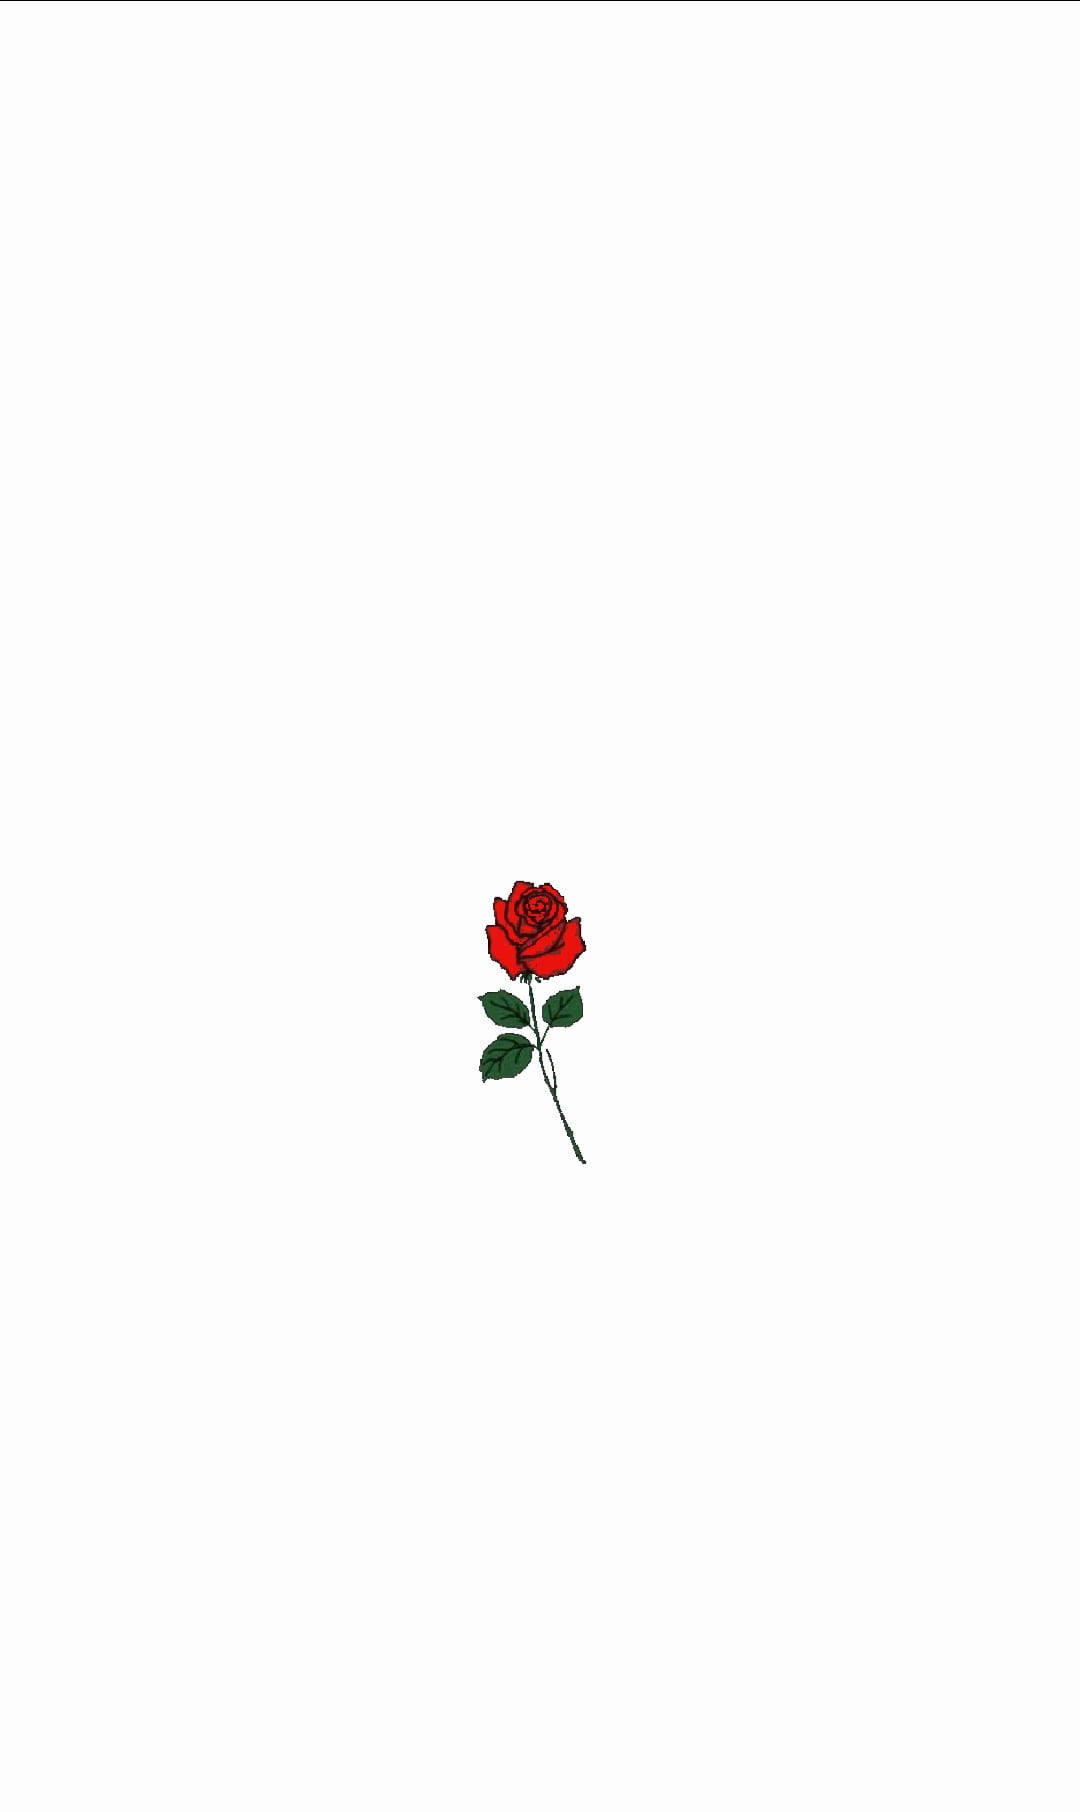 Minimalist Rose With Stem White Screen Background